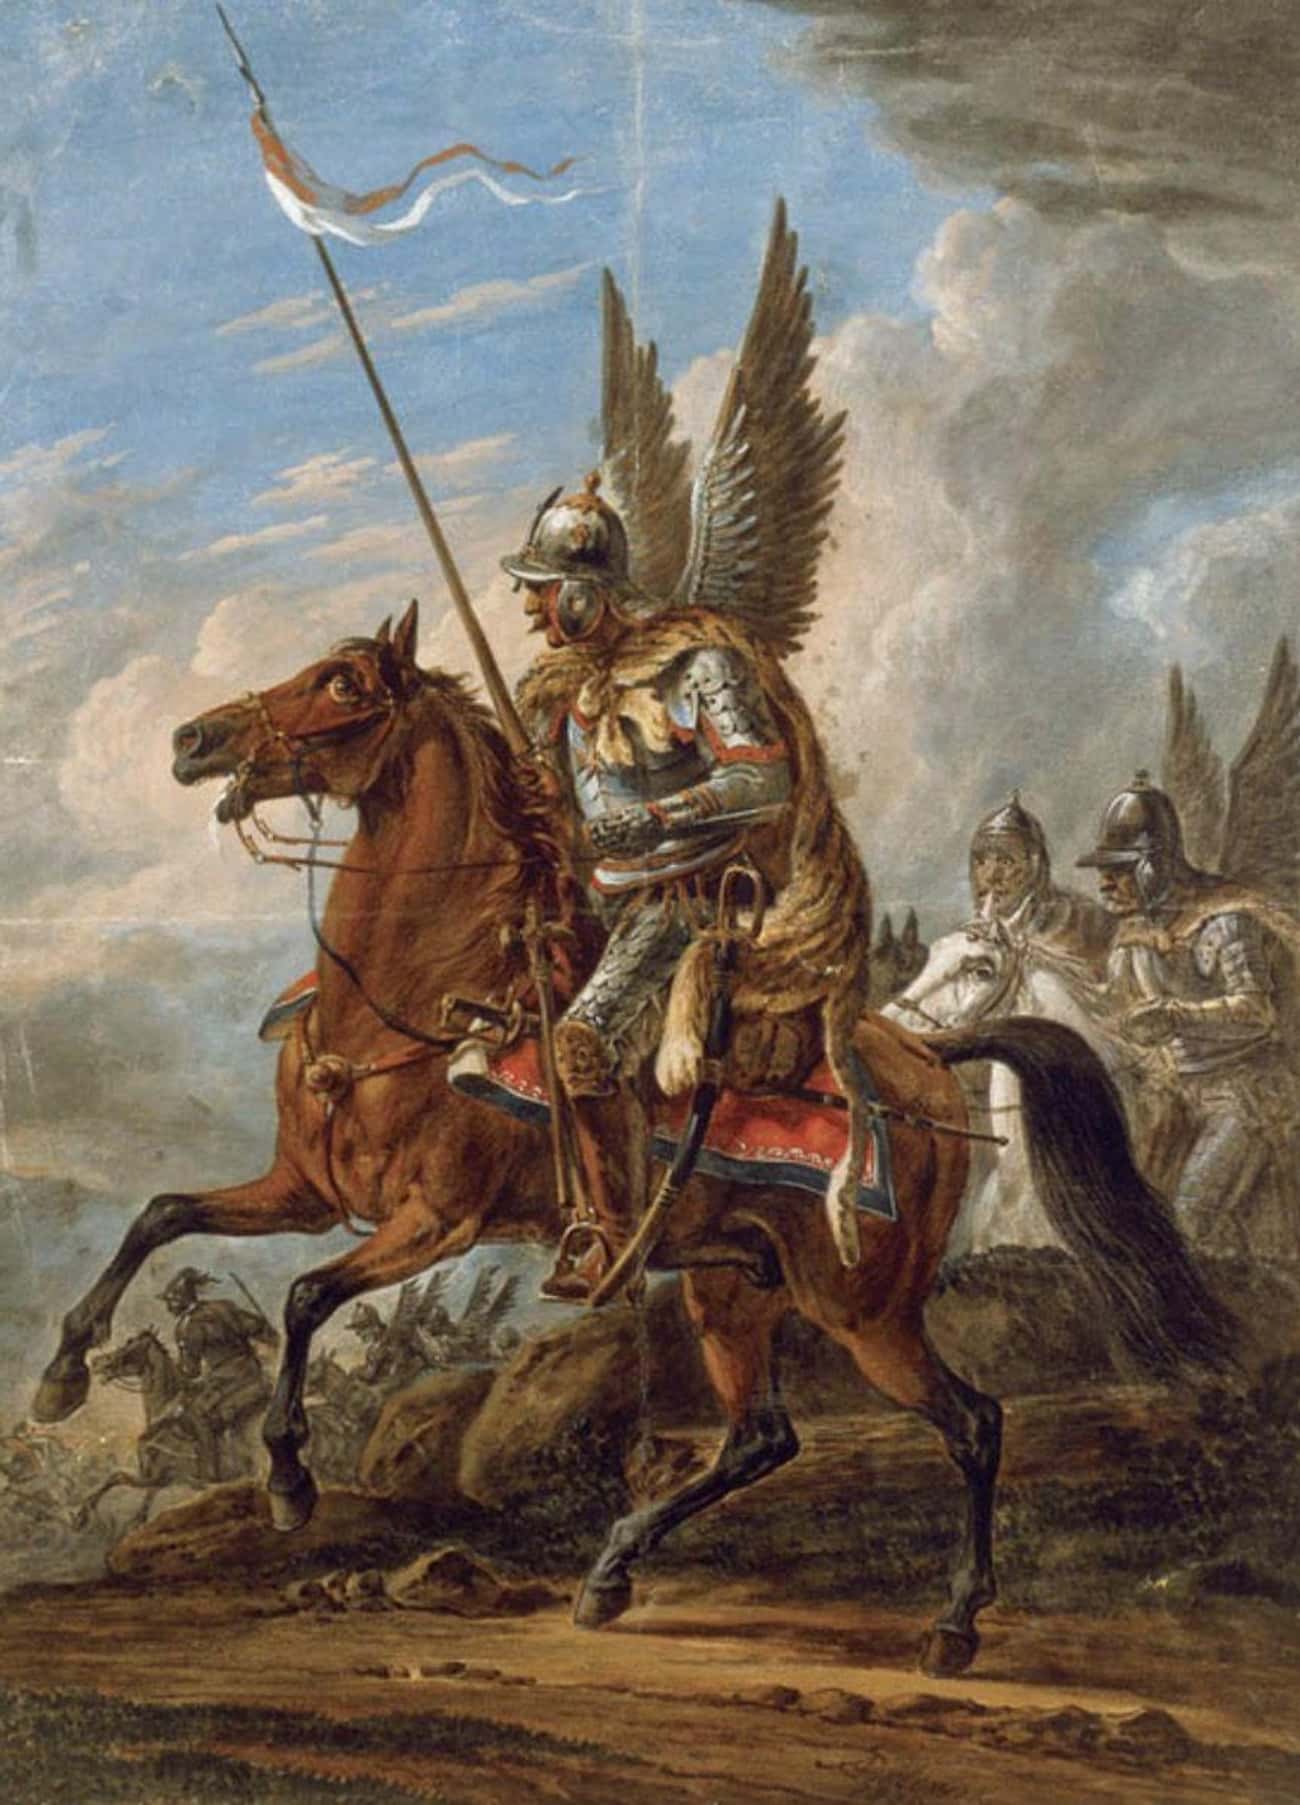 Polish Heavy Cavalry Rode Into Battle With Wings On Their Backs